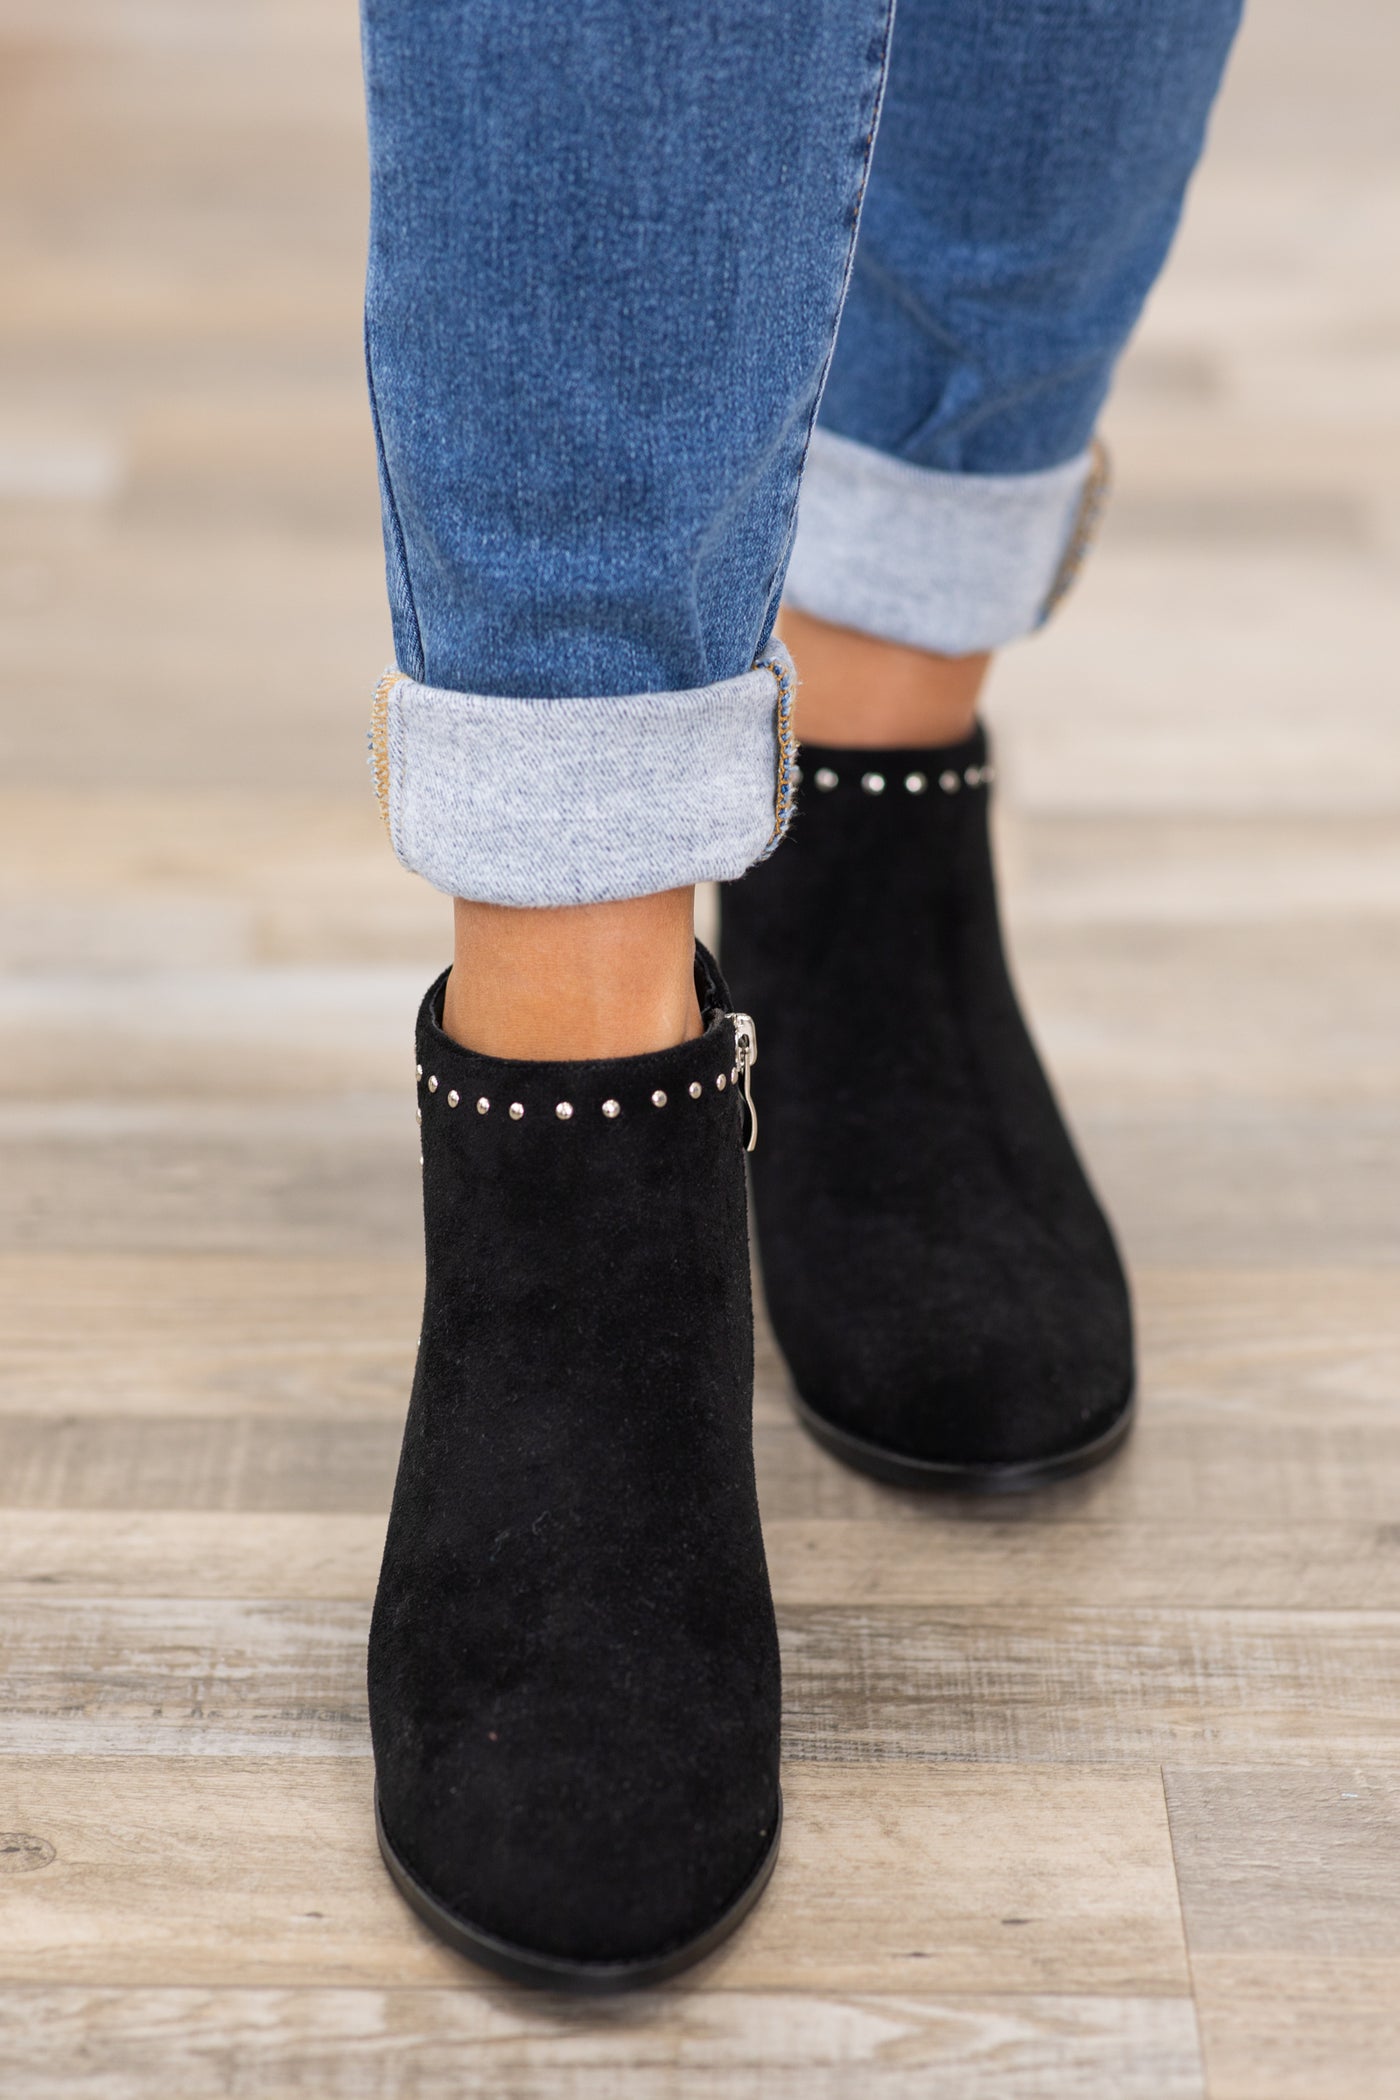 Black Ankle Booties With Stud Detail